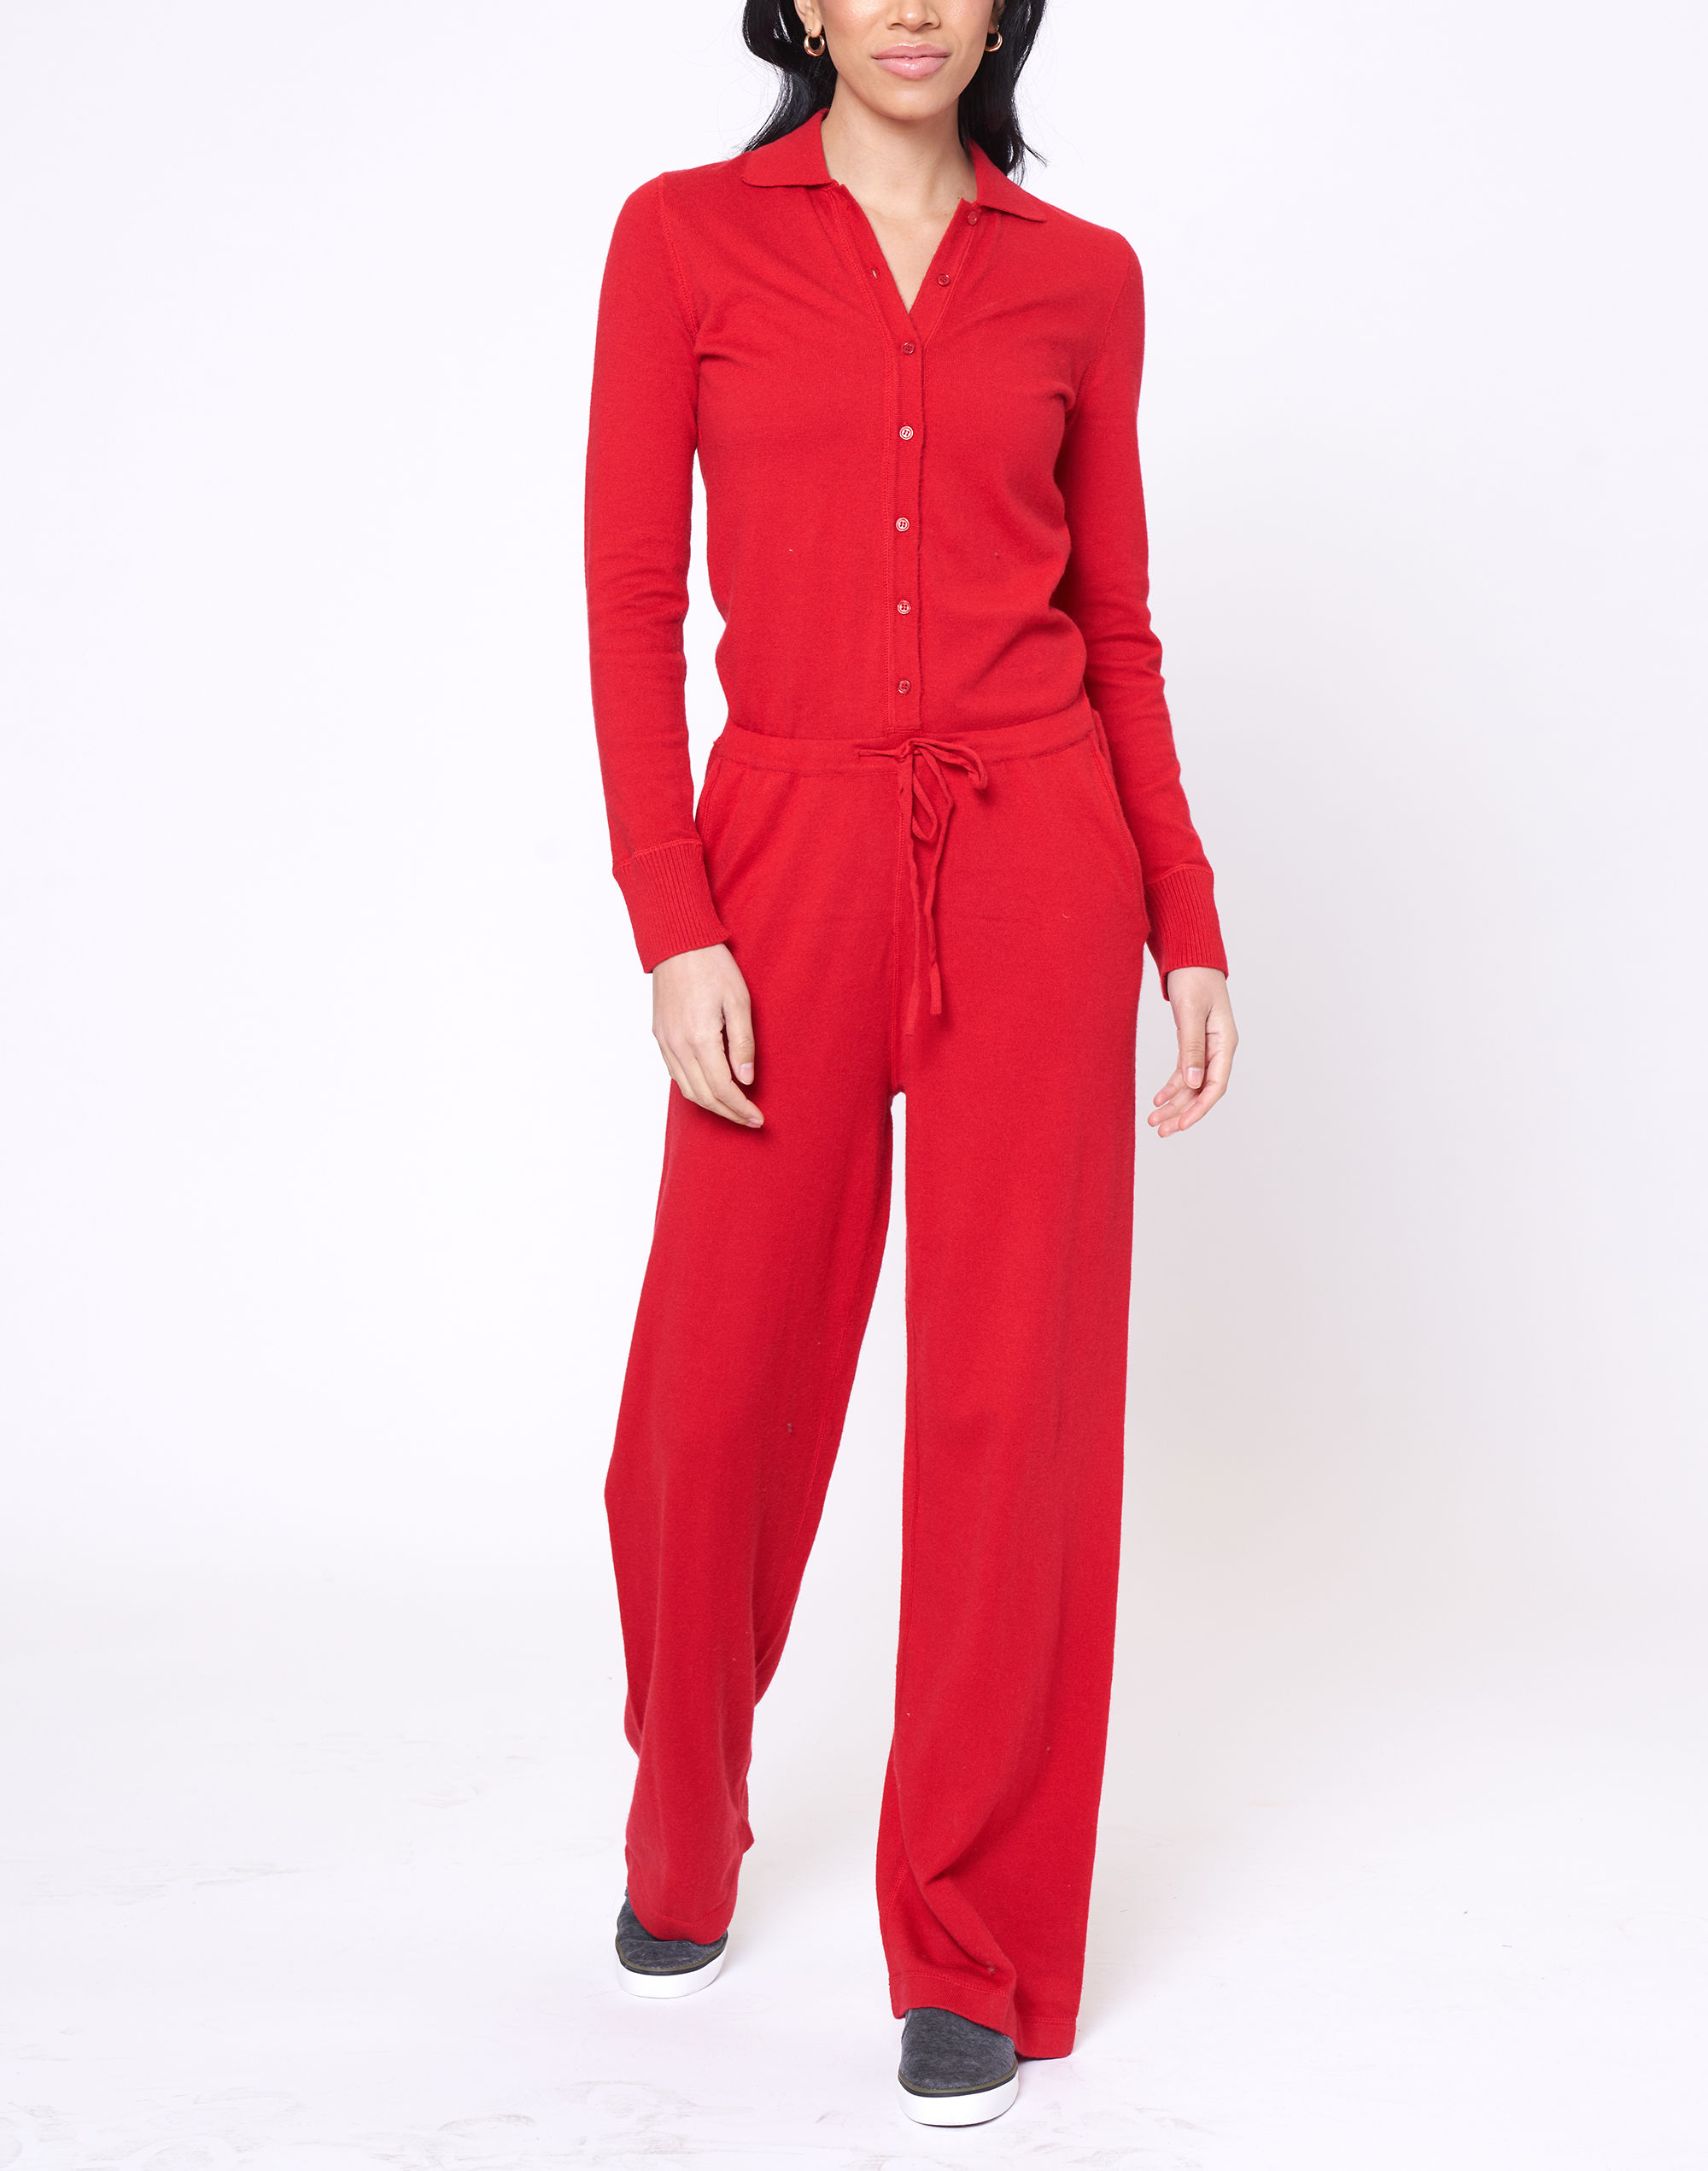 Mw Leimere Naples Jumpsuit In Red